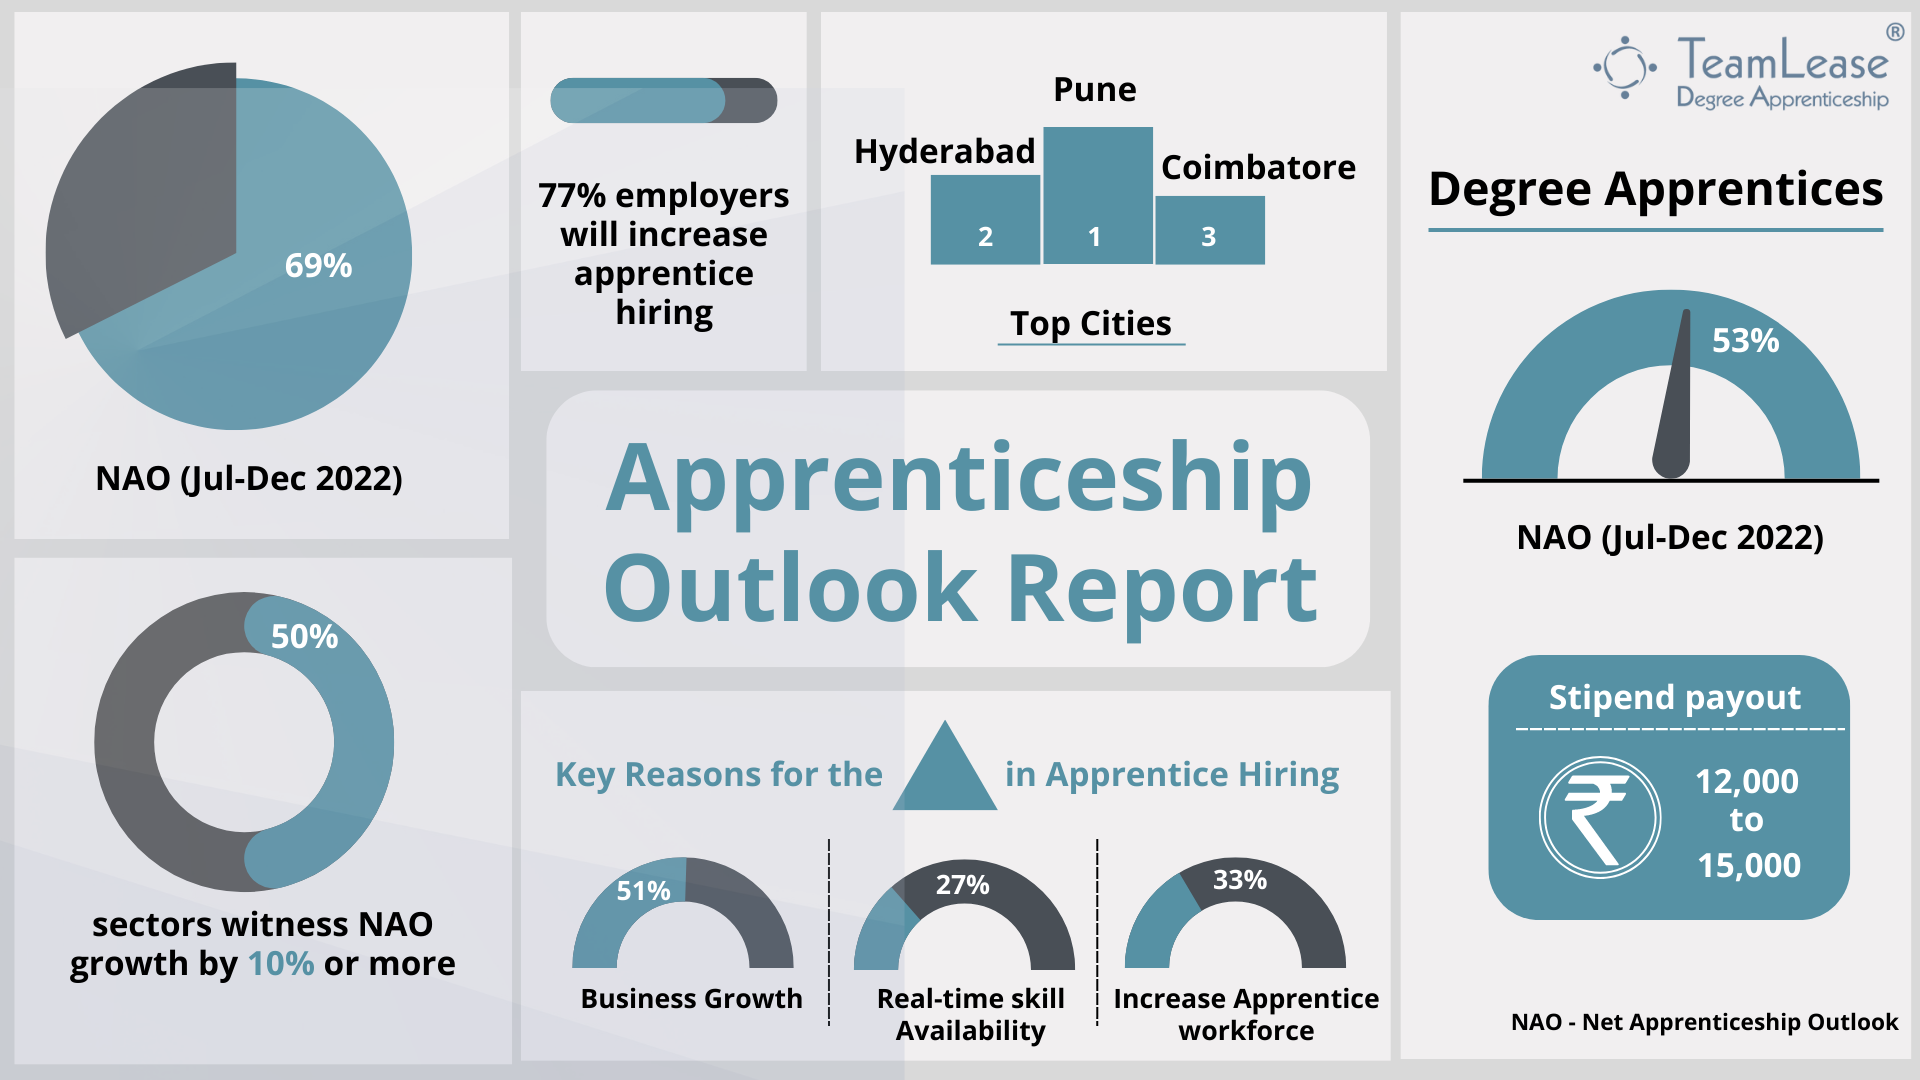 Apprenticeship-Outlook-Report-Key-Insights